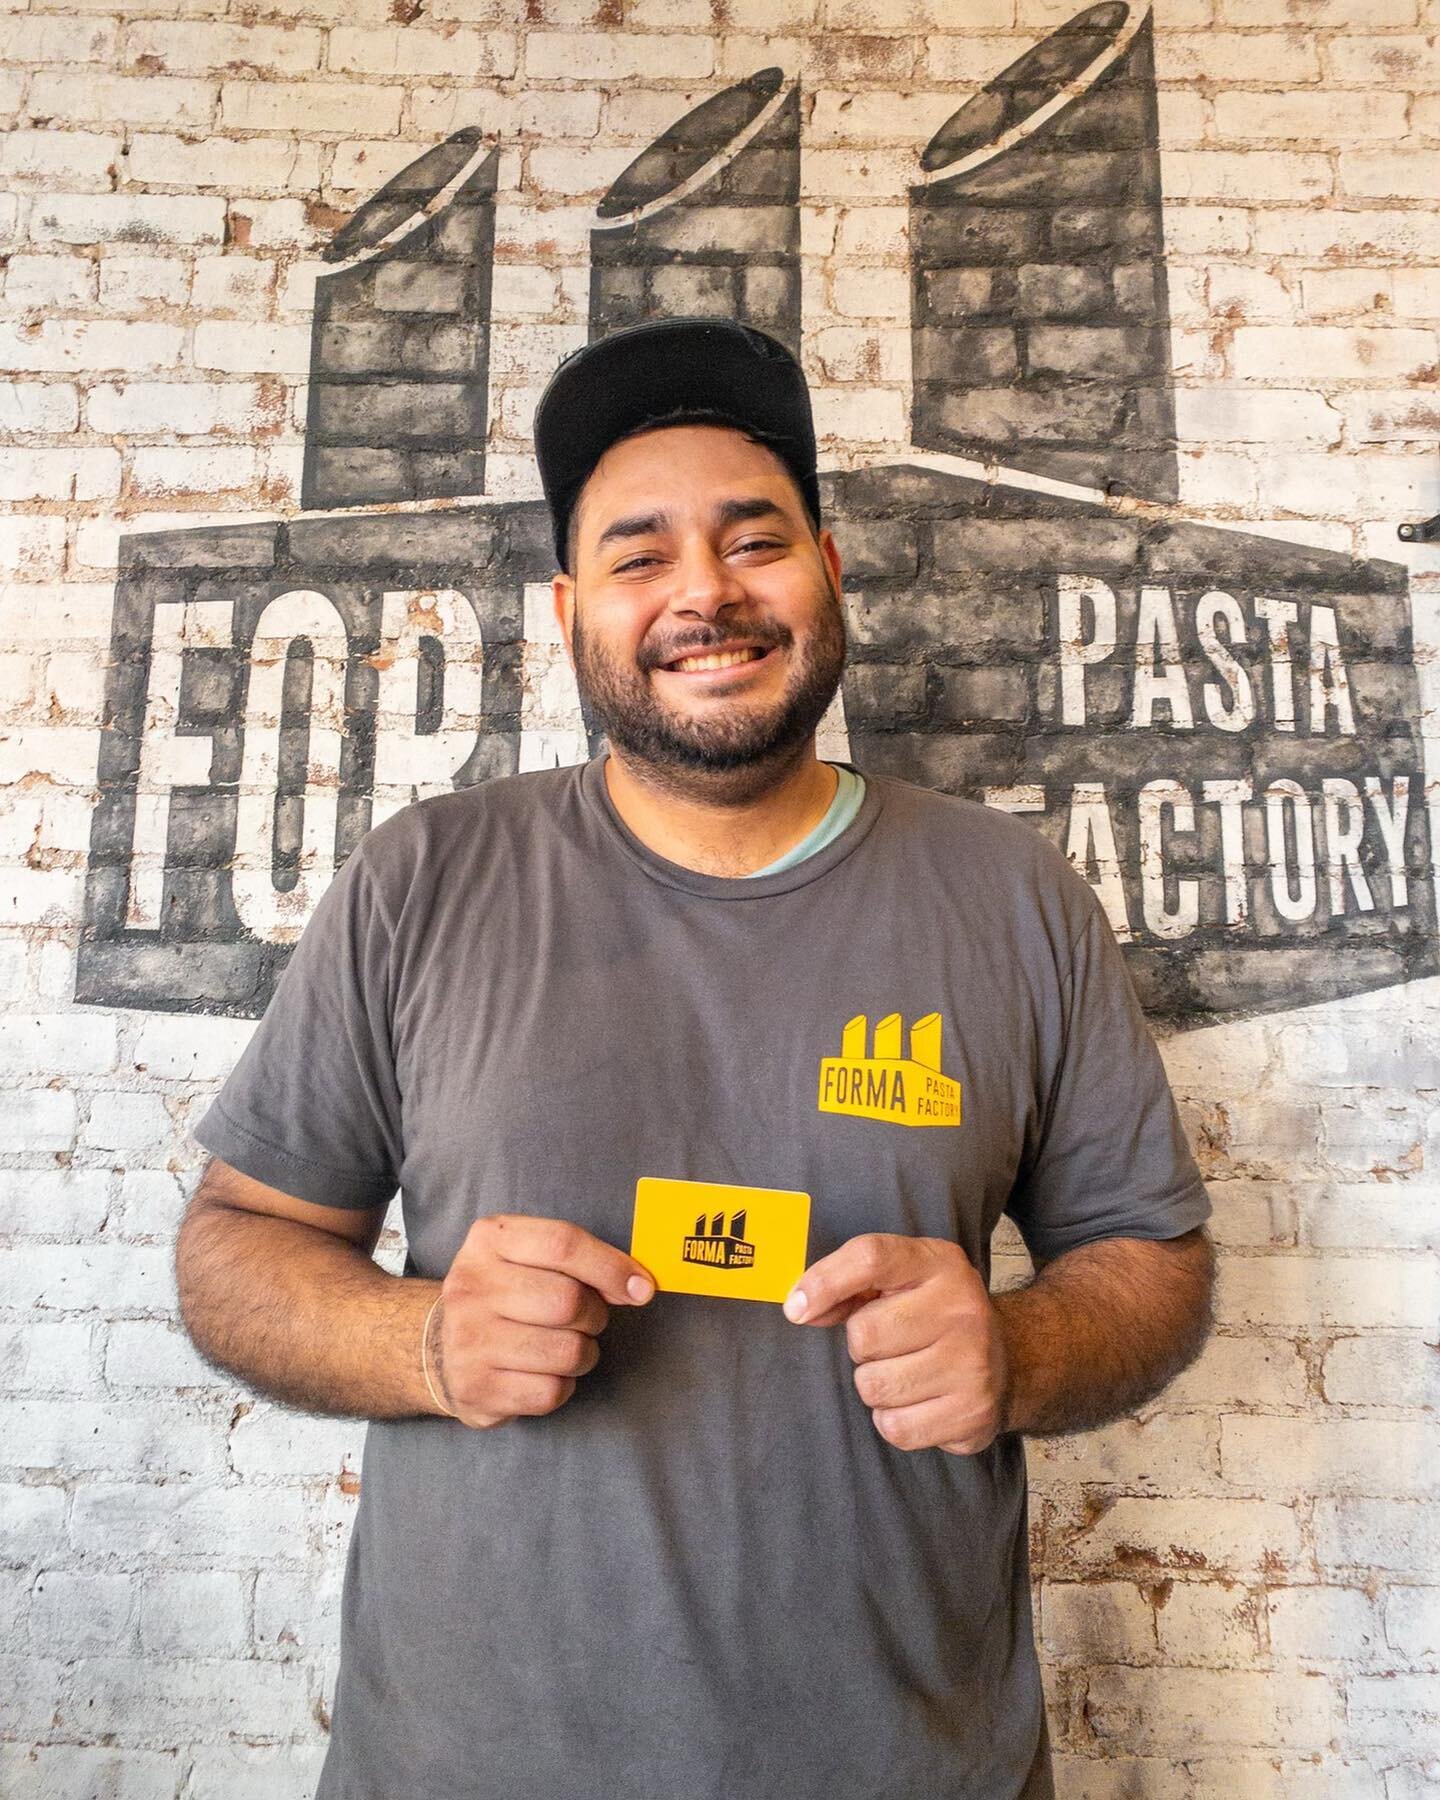 Not a thirst trap, just Rami announcing the winner for our national pasta day gift card giveaway. Congrats to @lintelligent_ 💛 Thank you for all the love and support 🙏